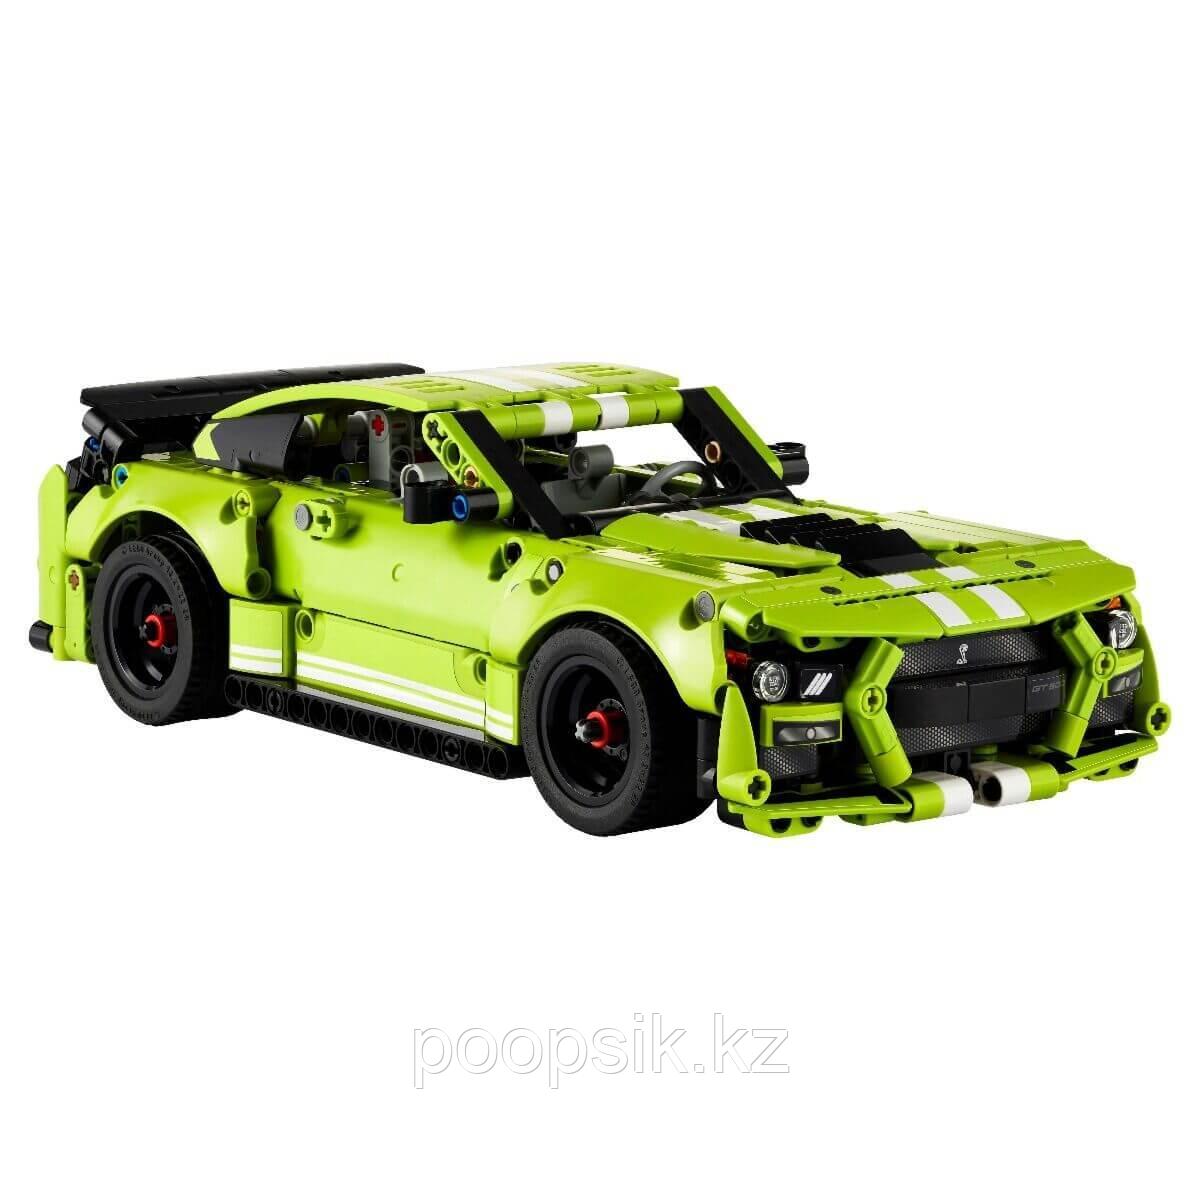 Lego Technic Ford Mustang Shelby 42138 - фото 2 - id-p107654630